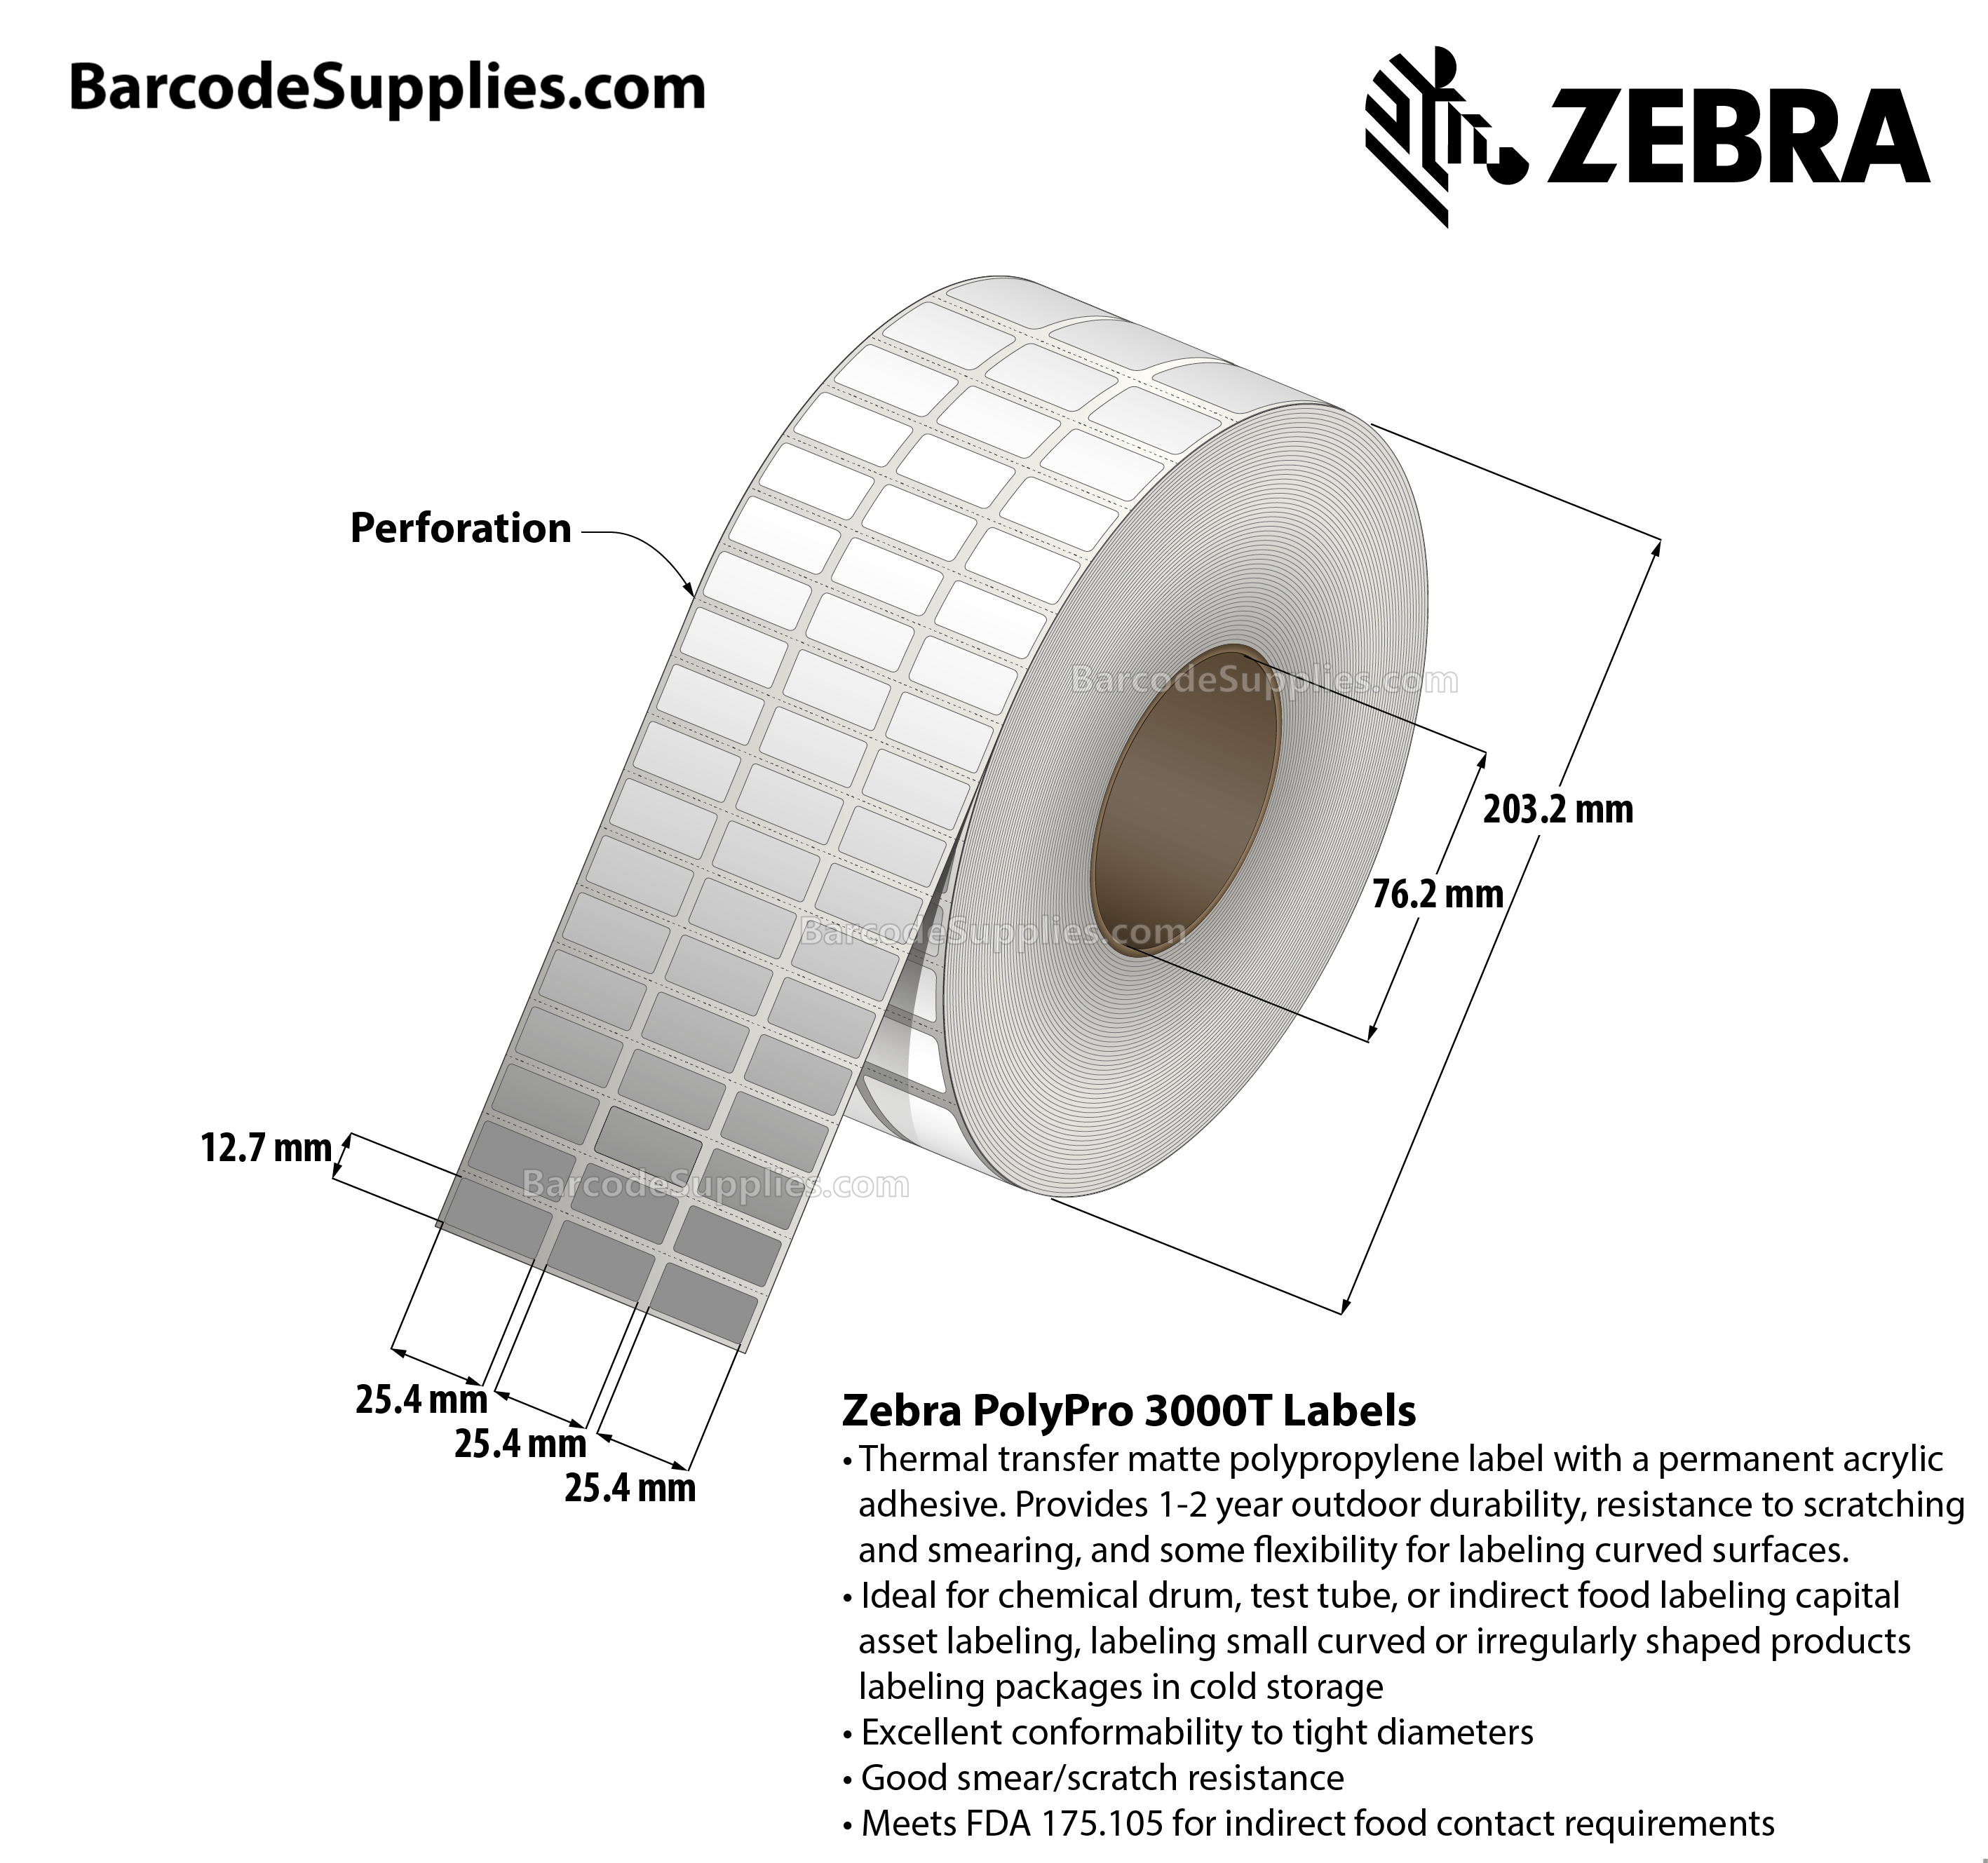 1 x 0.5 Thermal Transfer White PolyPro 3000T (3-Across) Labels With Permanent Adhesive - Perforated - 10002 Labels Per Roll - Carton Of 4 Rolls - 40008 Labels Total - MPN: 10011987